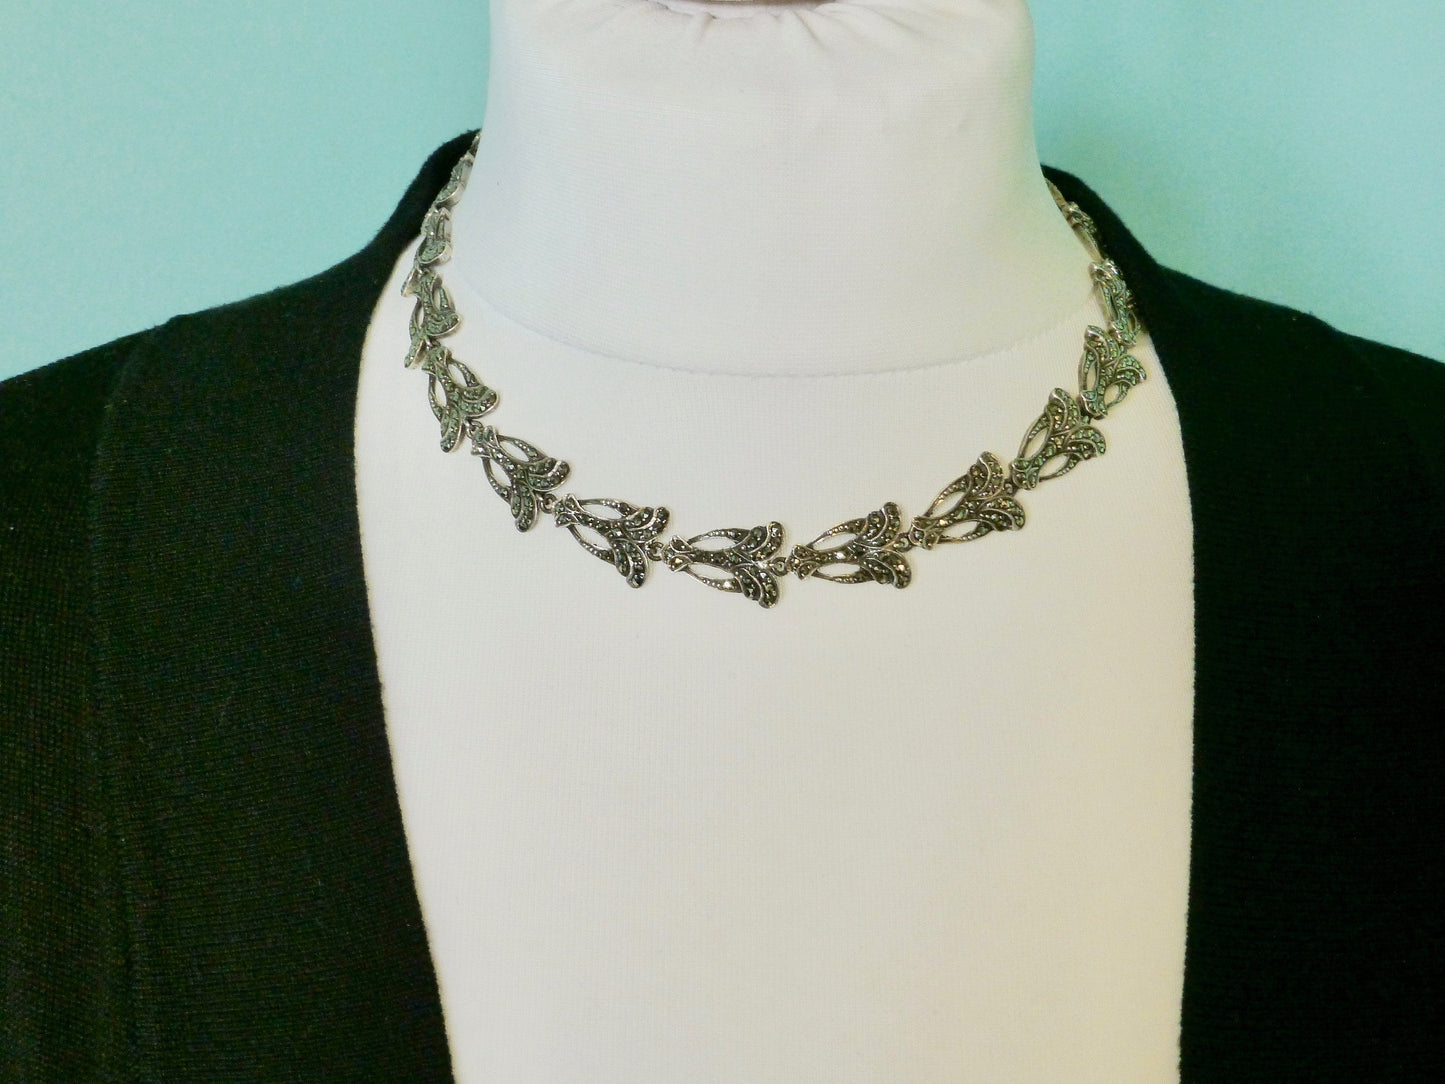 Vintage Art Deco silver marcasite articulated collar necklace c1930's